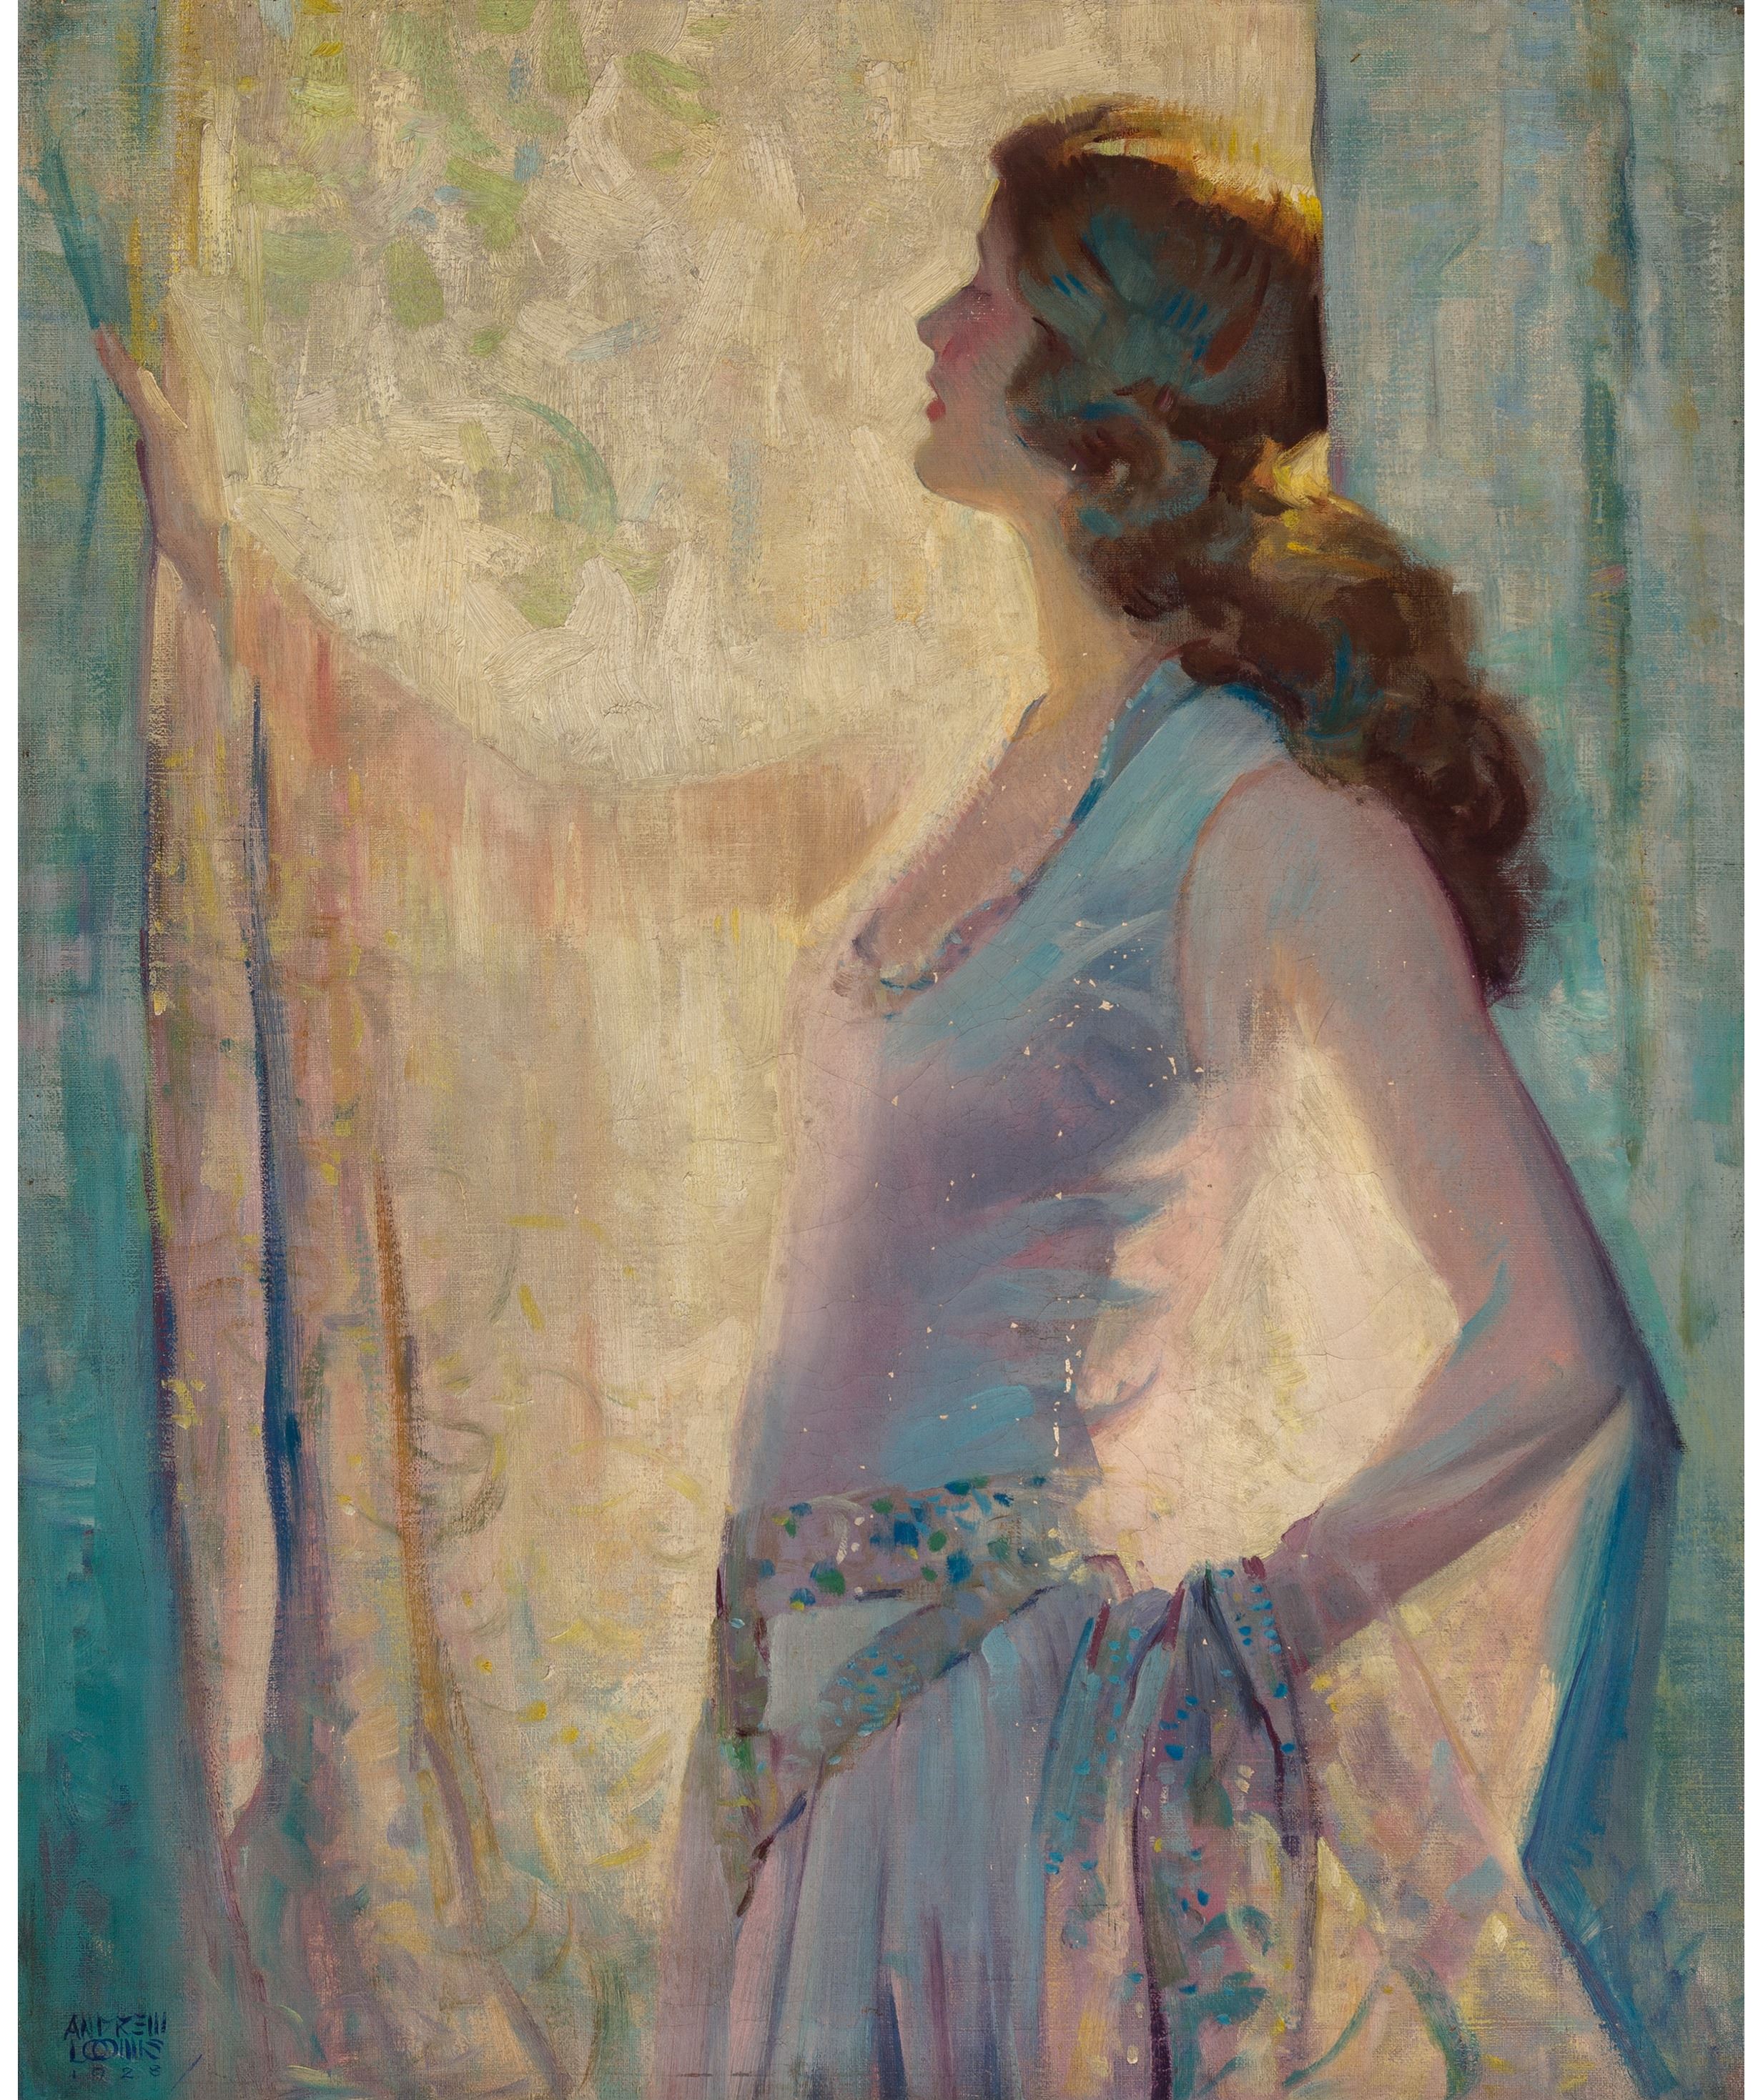 Artwork by Andrew Loomis, Lady in the Sunlight, Made of Oil on canvas